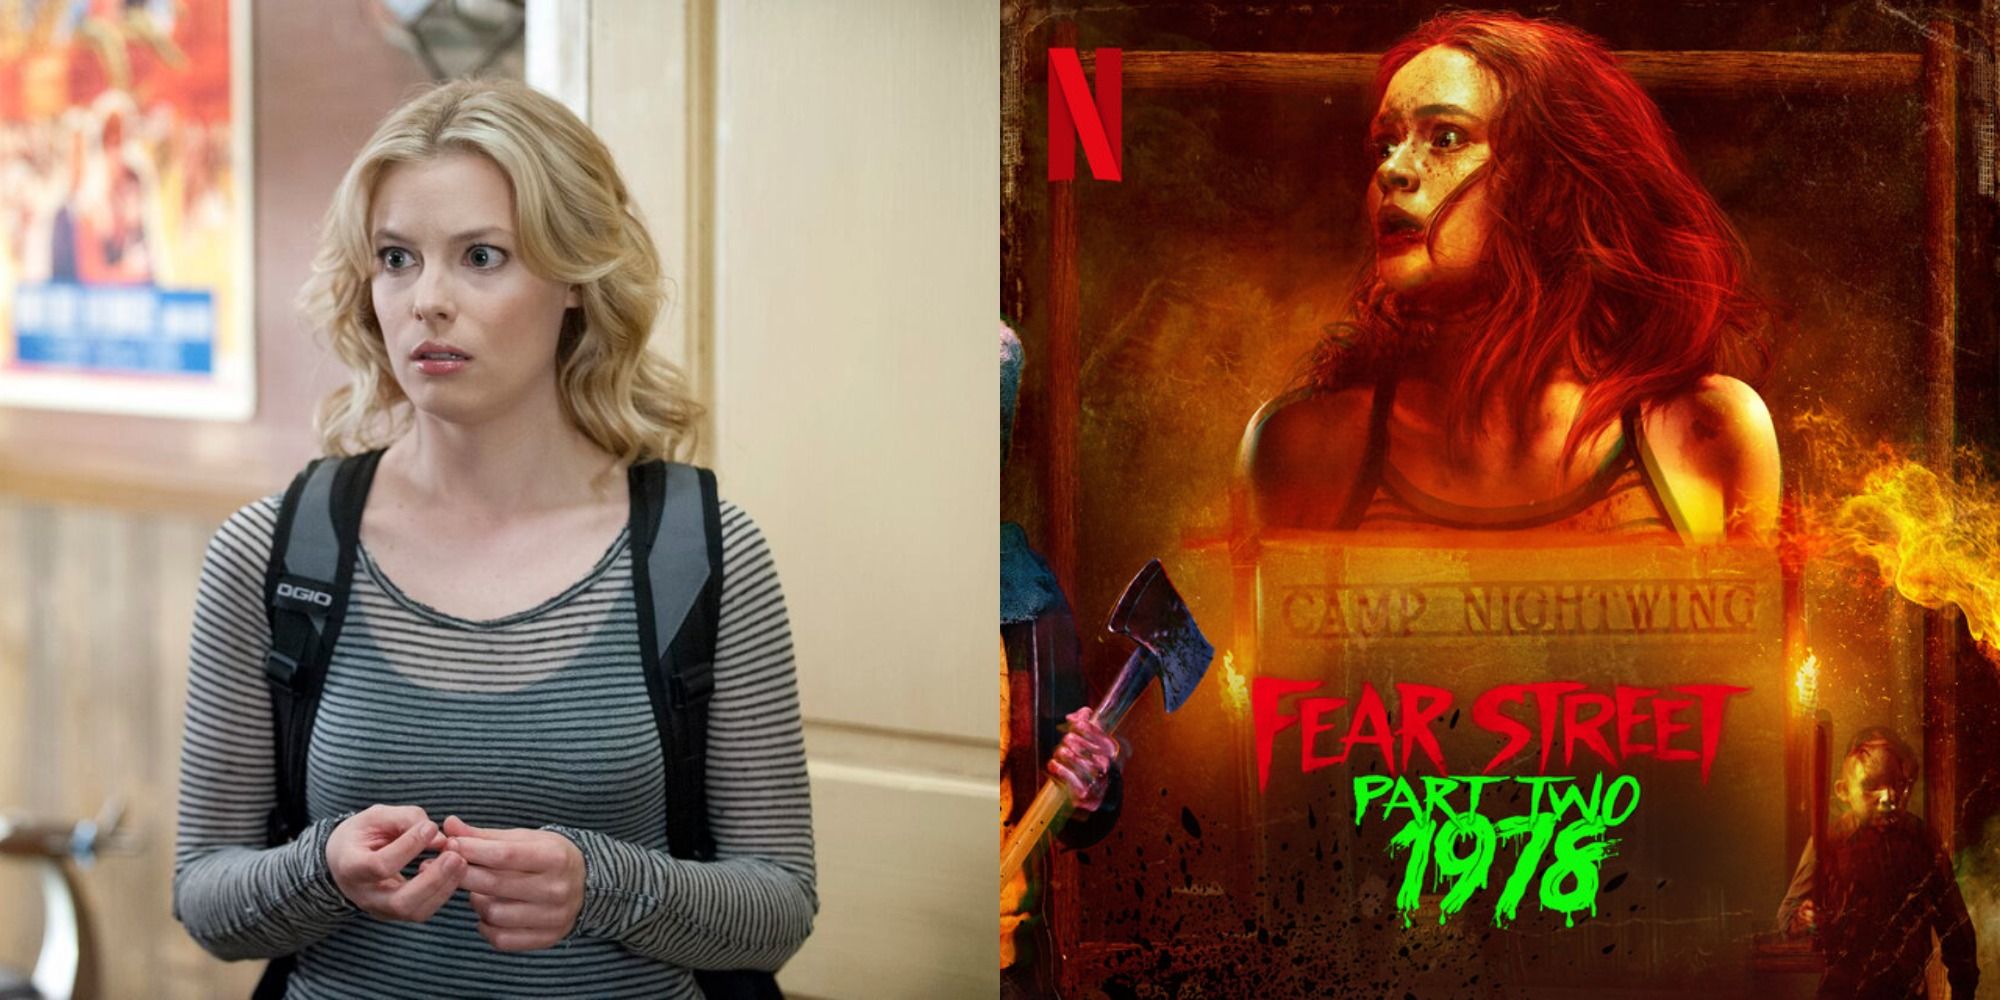 A split image of Gillian Jacobs in Community and the Fear Street part 2 poster